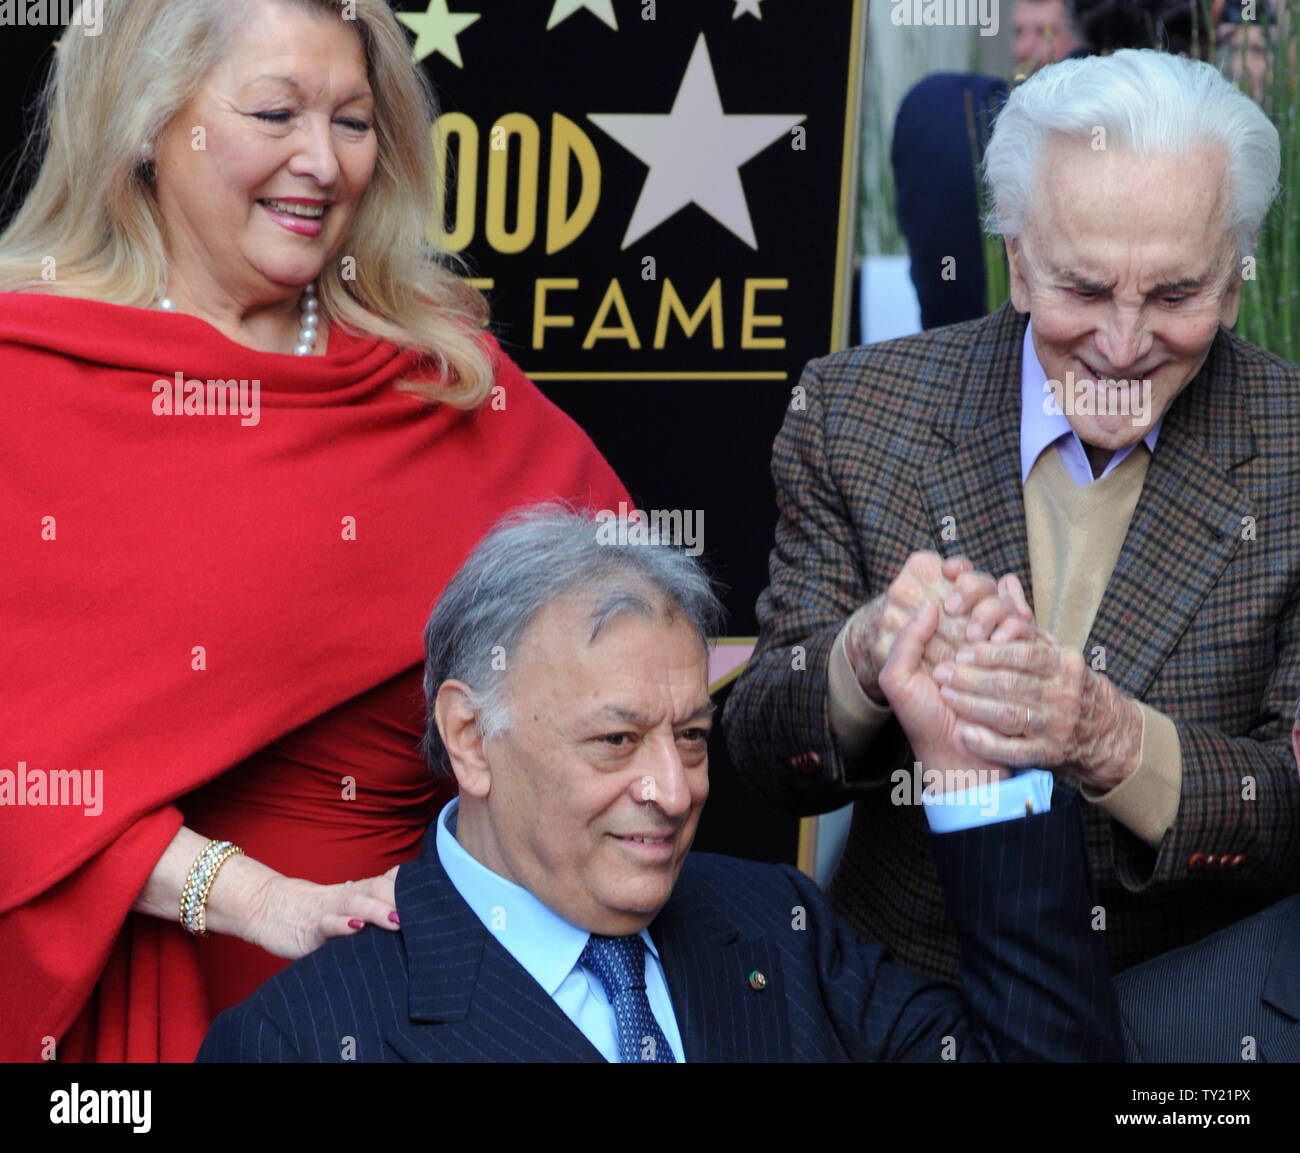 International orchestral and operatic conductor Zubin Mehta (C) is congratulated by his wife Nancy (L) and actor Kirk Douglas (R), during ceremonies honoring Mehta with the 2,434th star on the Hollywood Walk of Fame in Los Angeles on March 1, 2011. Members of the Los Angeles, Israel and Vienna Philharmonic Orchestras performed at the event.  UPI/Jim Ruymen Stock Photo